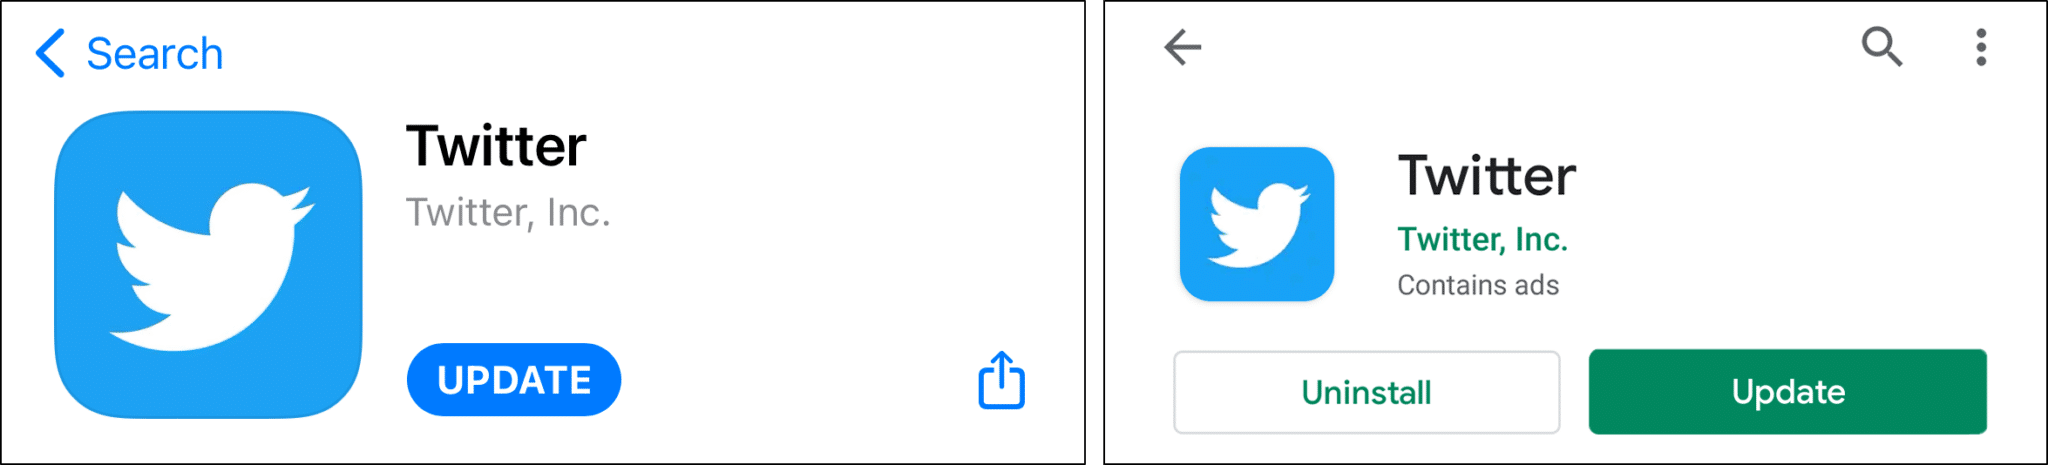 update twitter app to fix Twitter home page, 'for you' or 'following' feed not working, updating, stuck loading